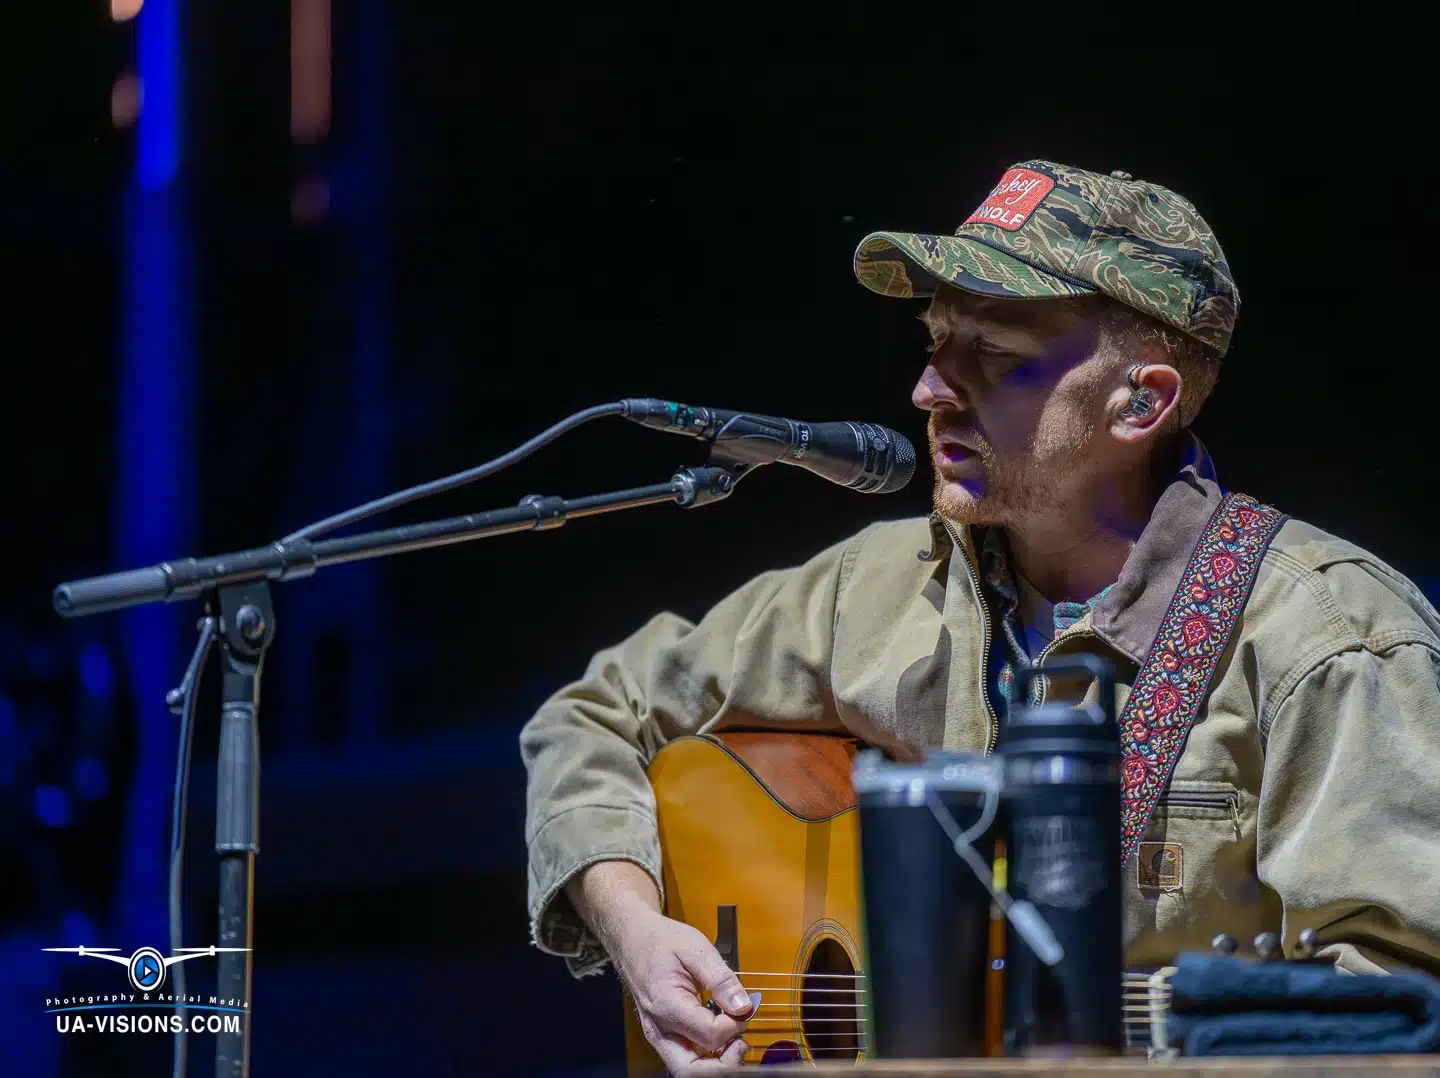 Tyler Childers immersed in a heartfelt performance, connecting deeply with the Healing Appalachia audience.